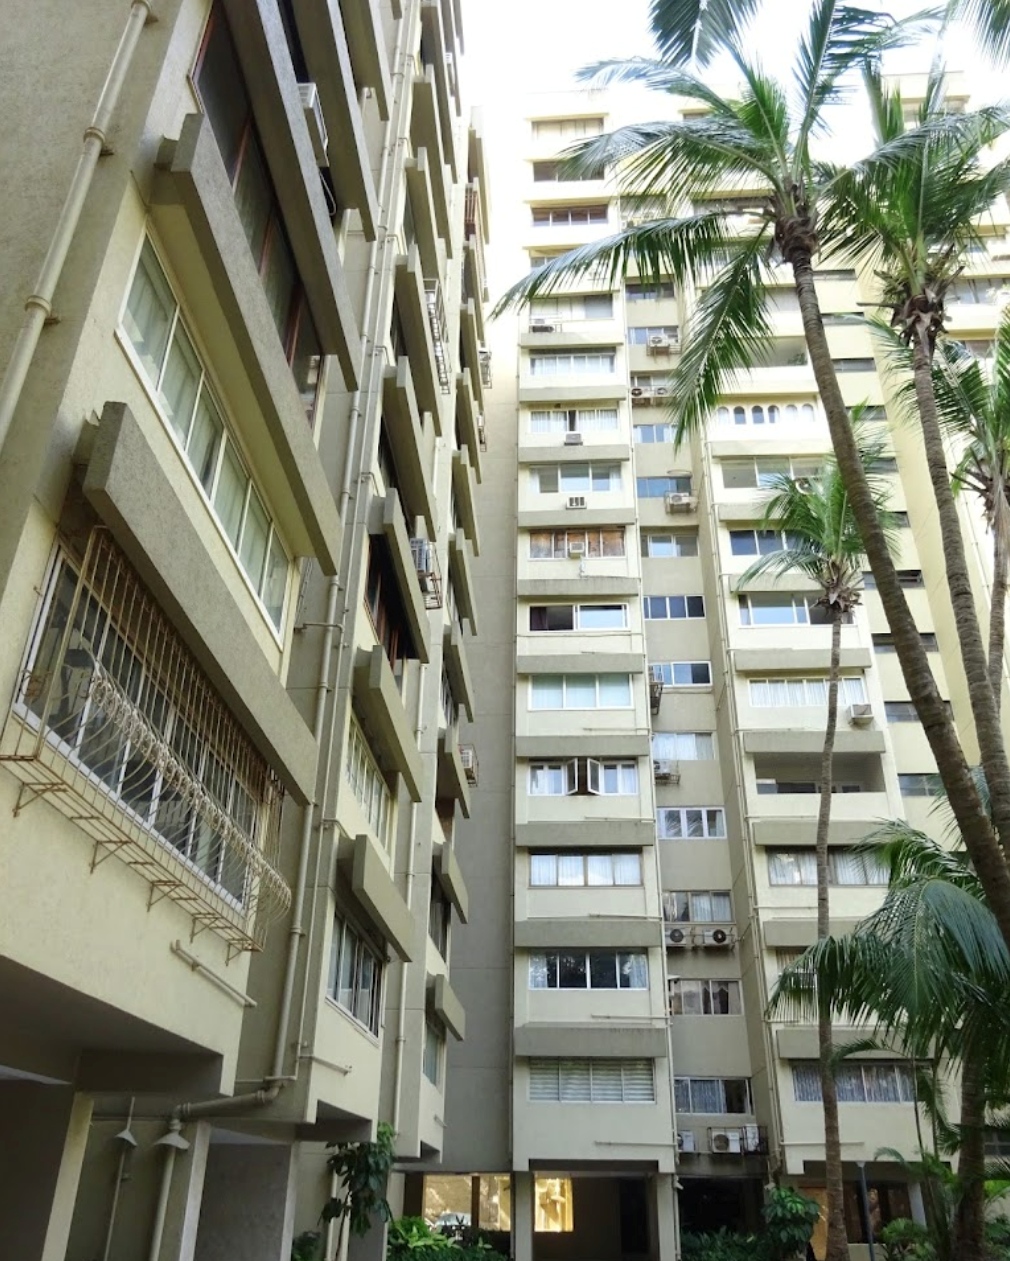 3 BHK Flat for Sale in Breach Candy - Ananta Apartment